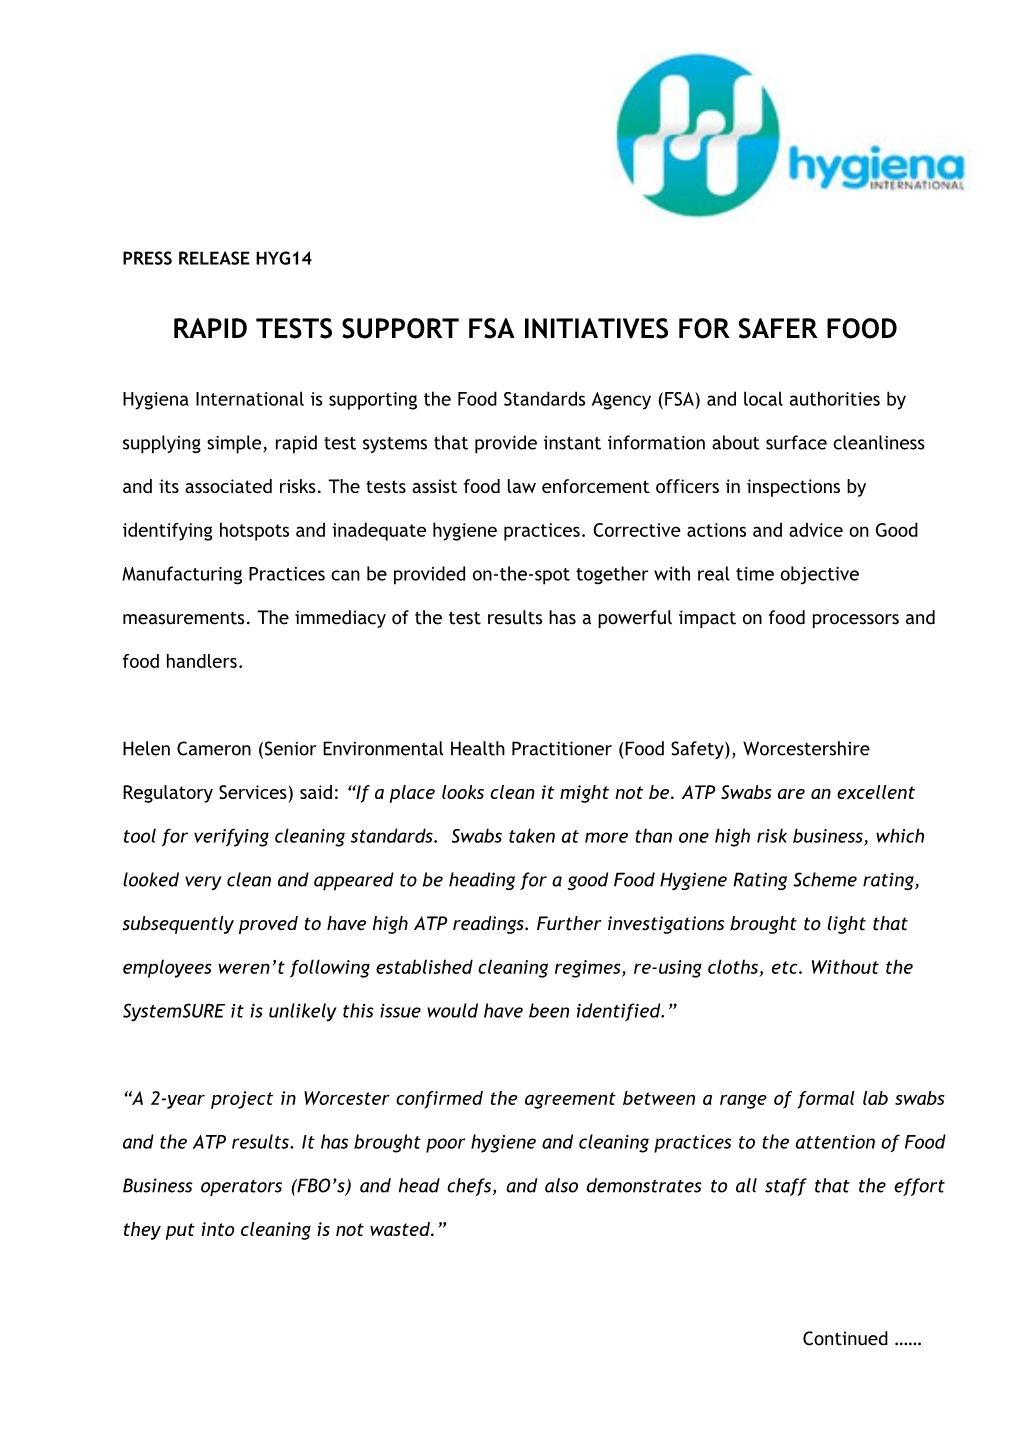 Rapid Tests Supports FSA Initiatives for Safer Food